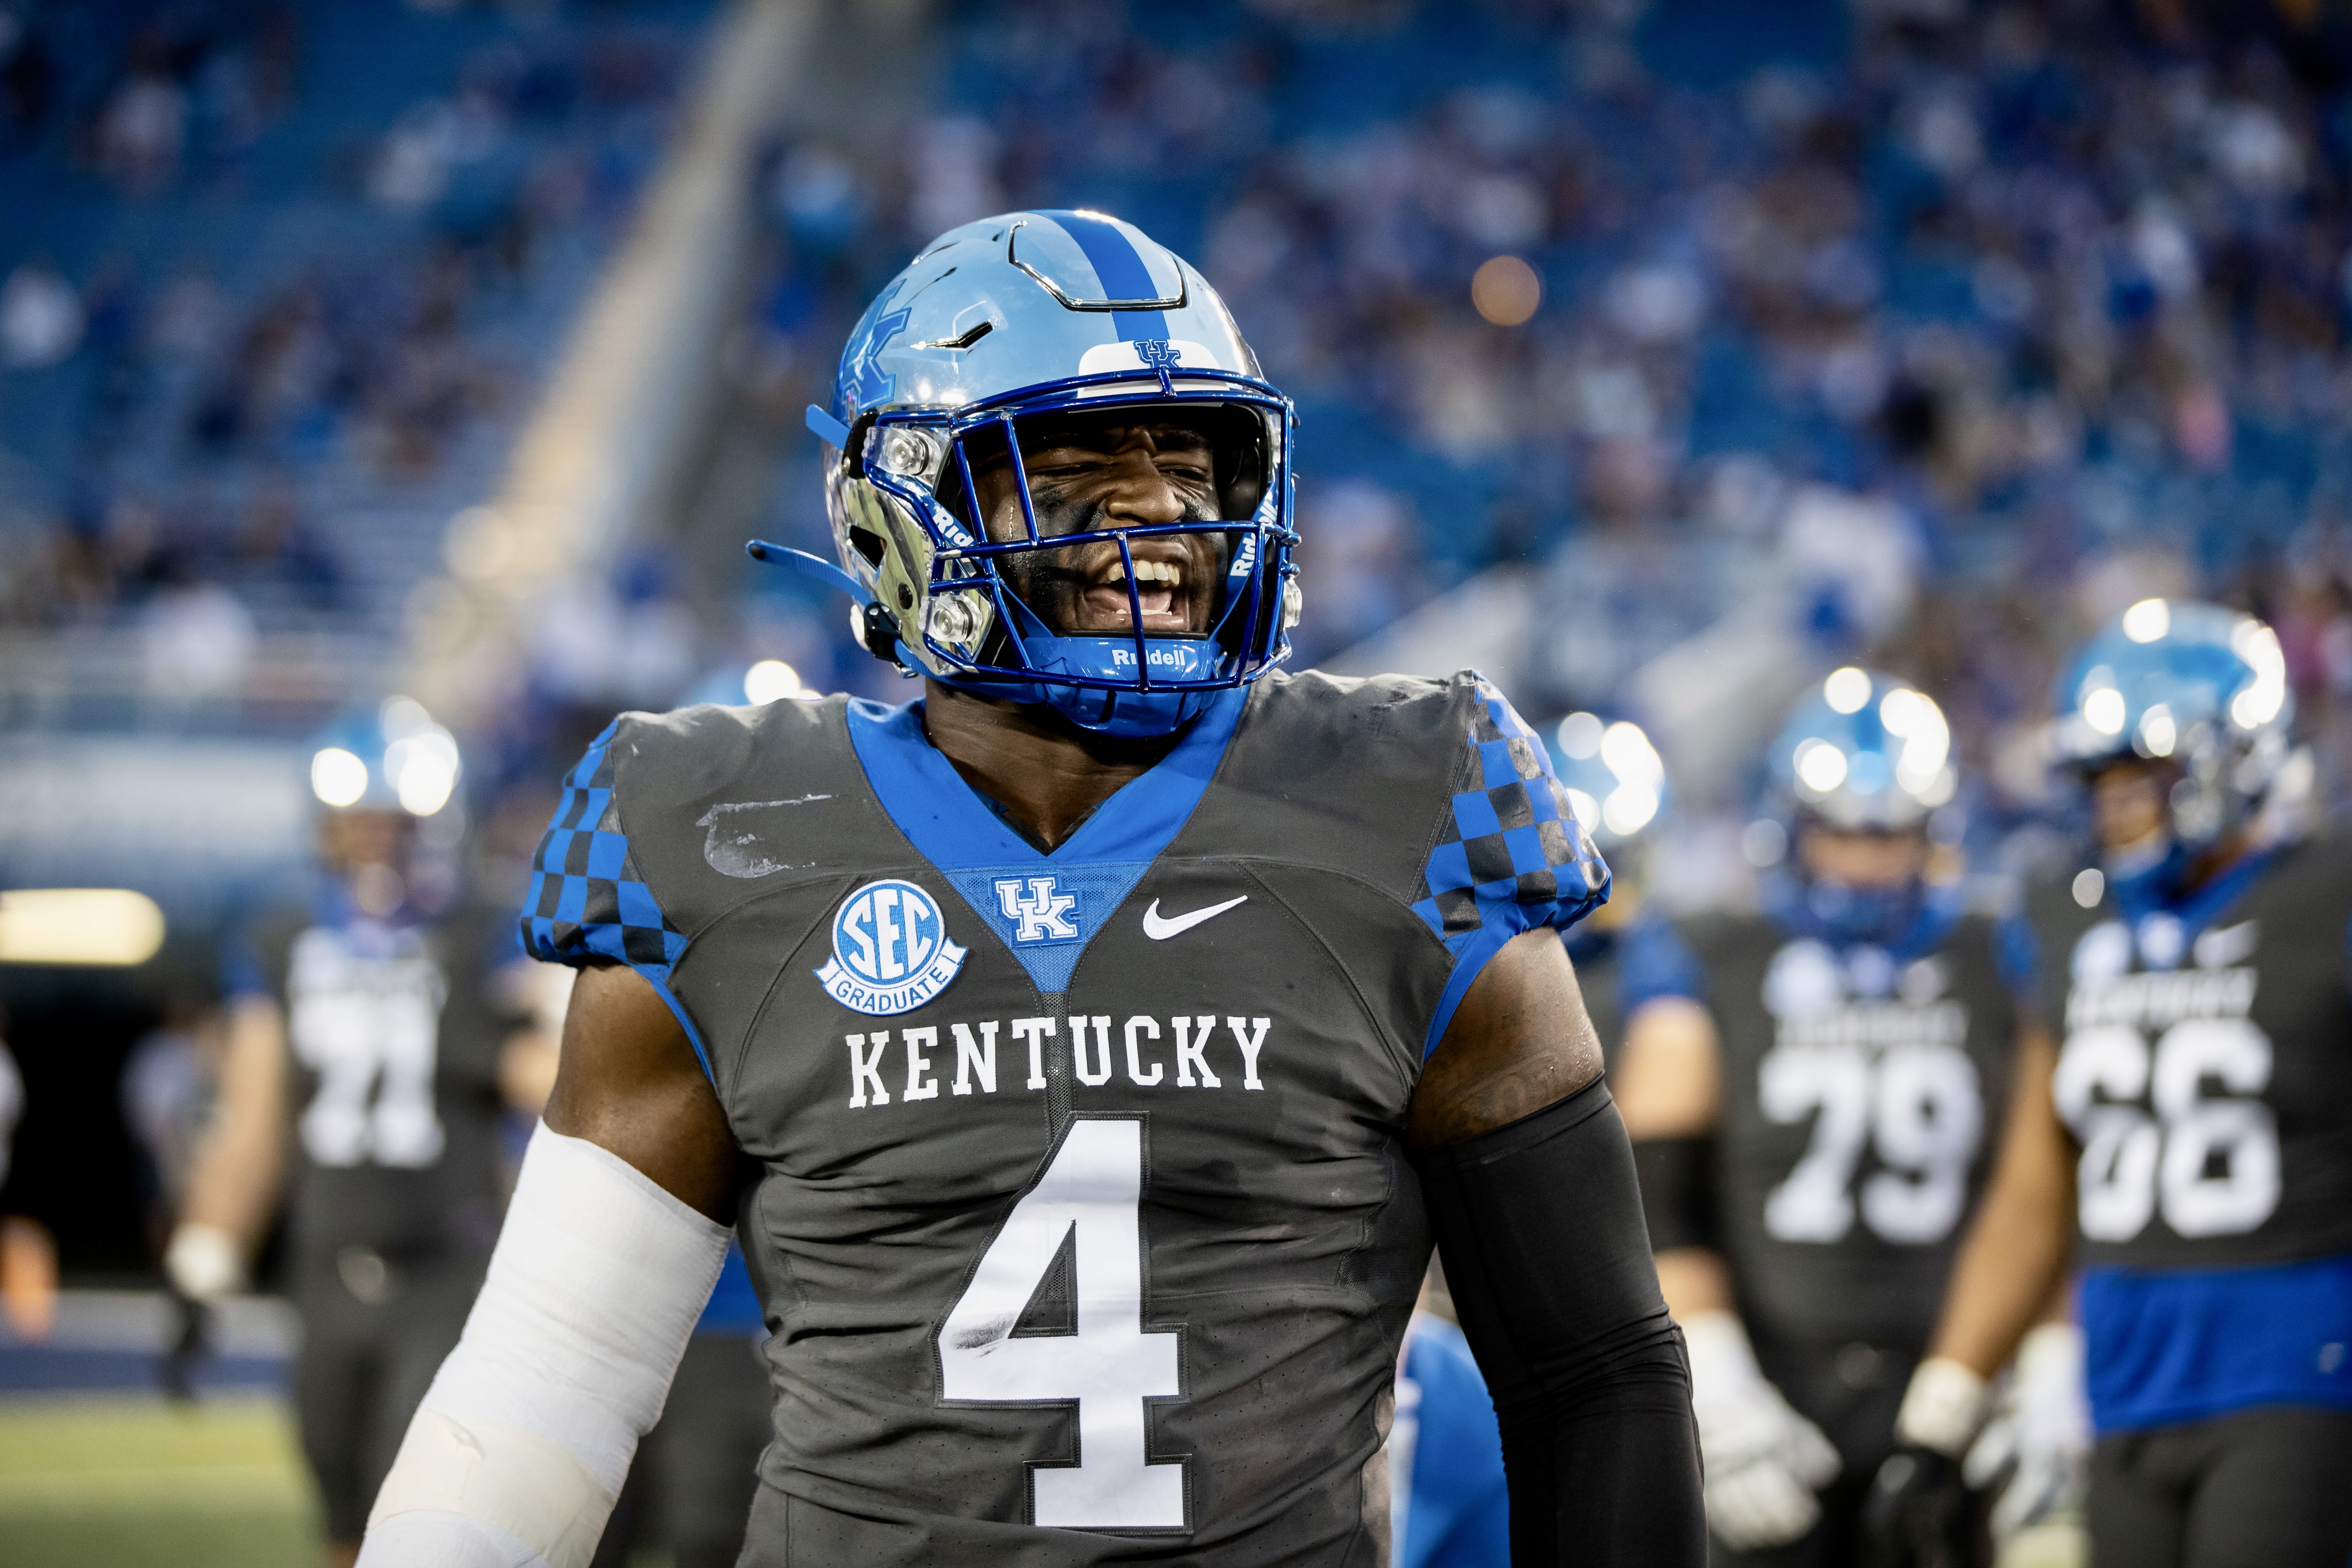 UK's Paschal picked in second round of NFL Draft by Lions